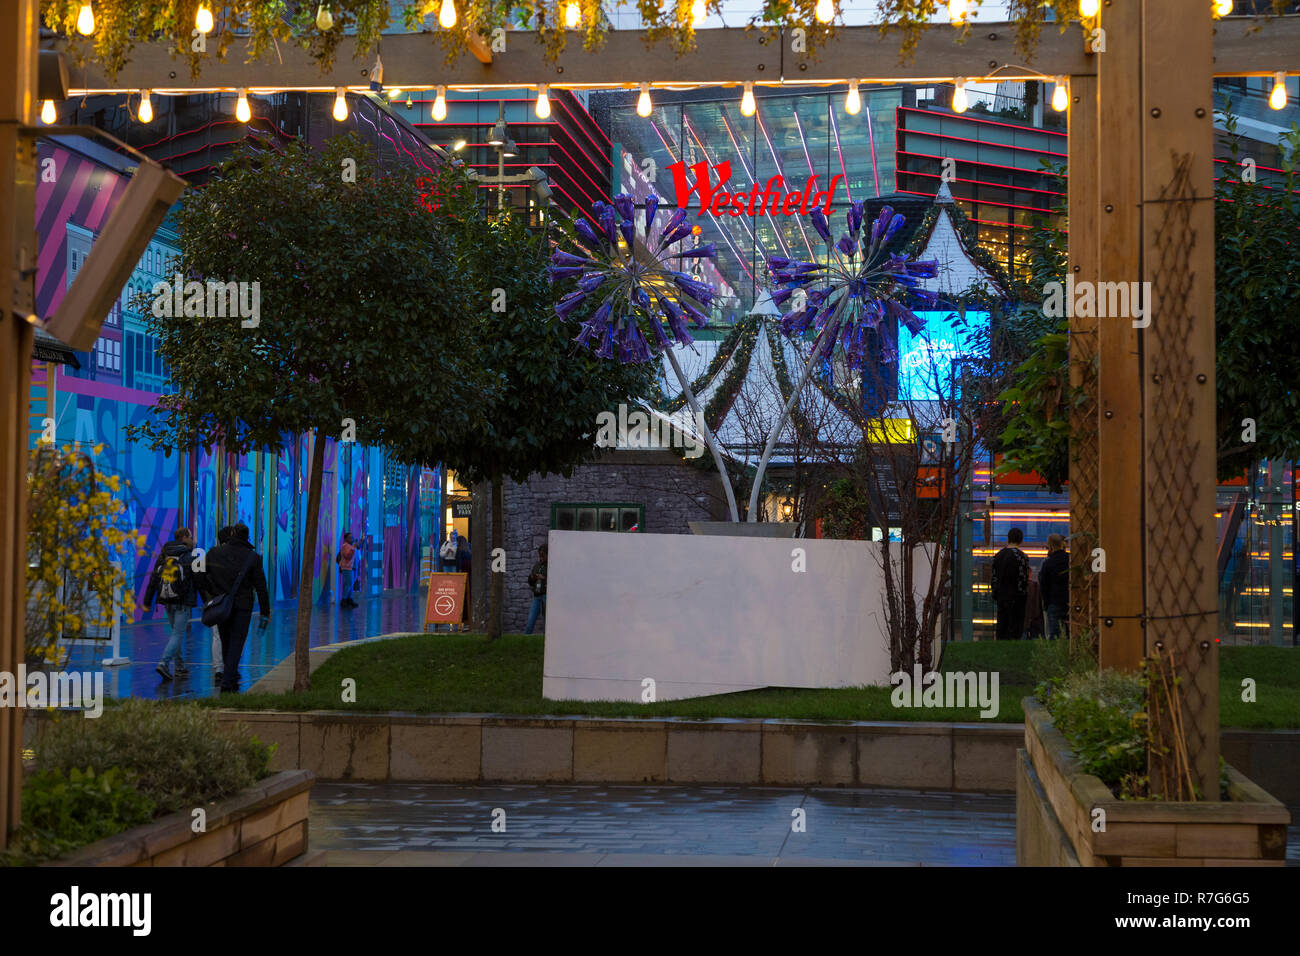 Westfield shopping centre, mall, christmas decorations, stratford, london, uk Stock Photo